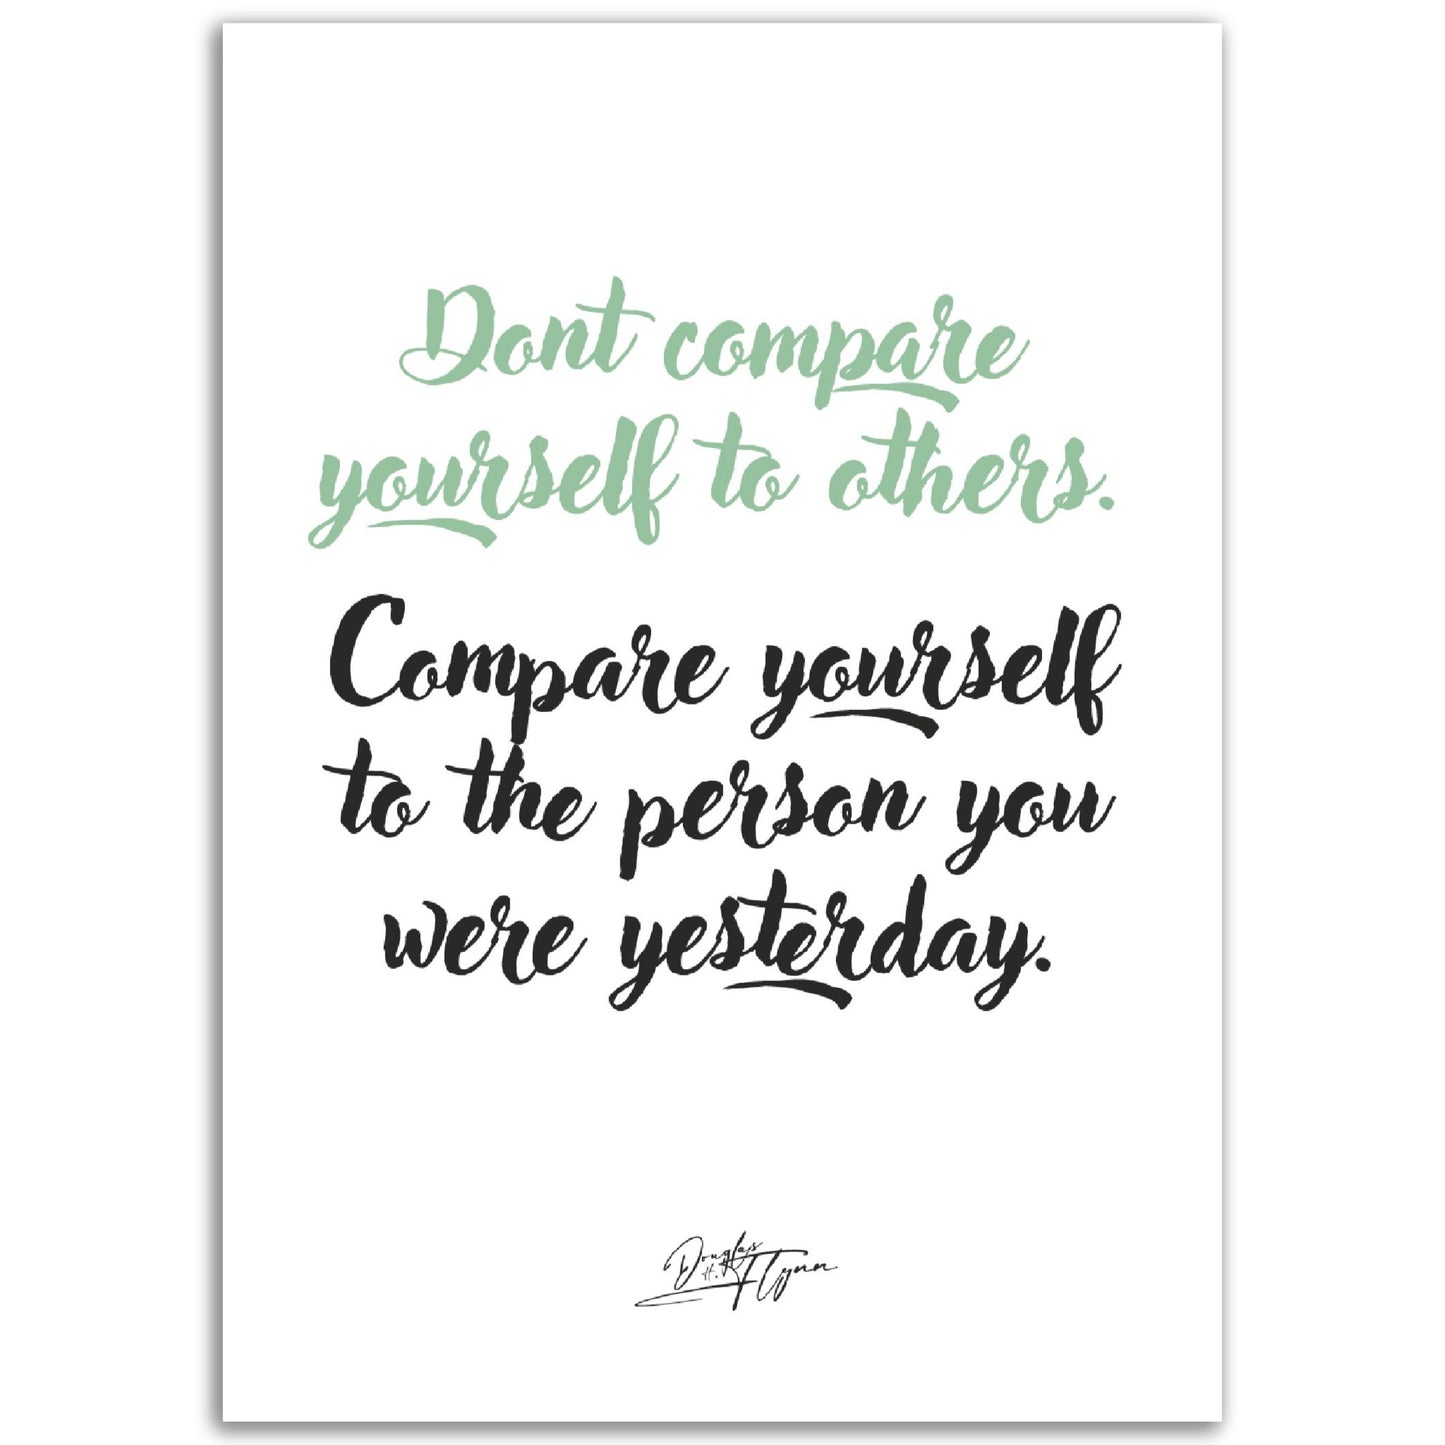 »Don't compare yourself to others«